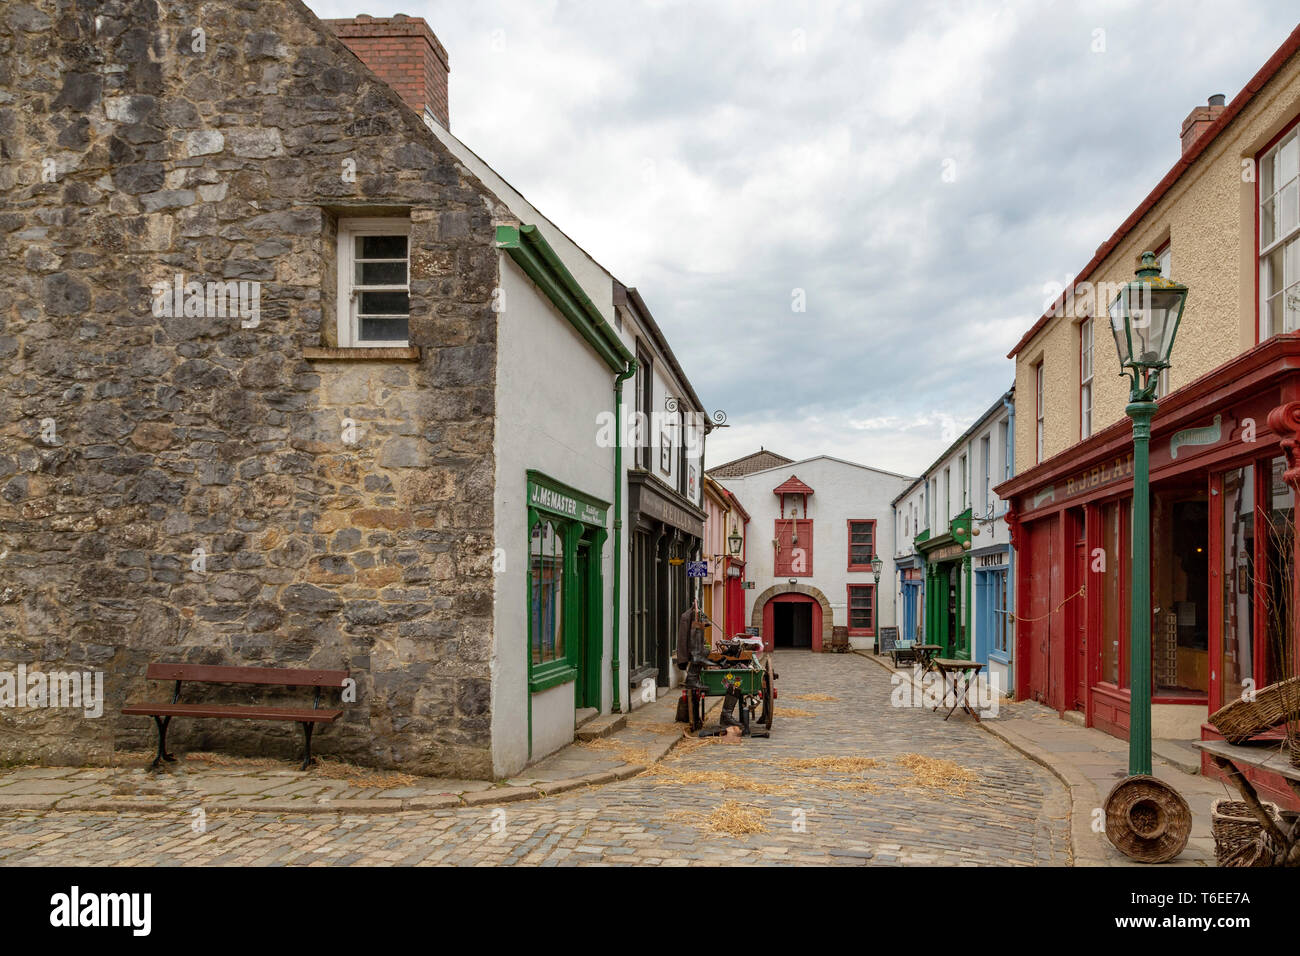 Historic Irish street with colorful shop fronts at the Ulster American Folk Park, Omagh, County Tyrone, Northern Ireland, UK. Stock Photo